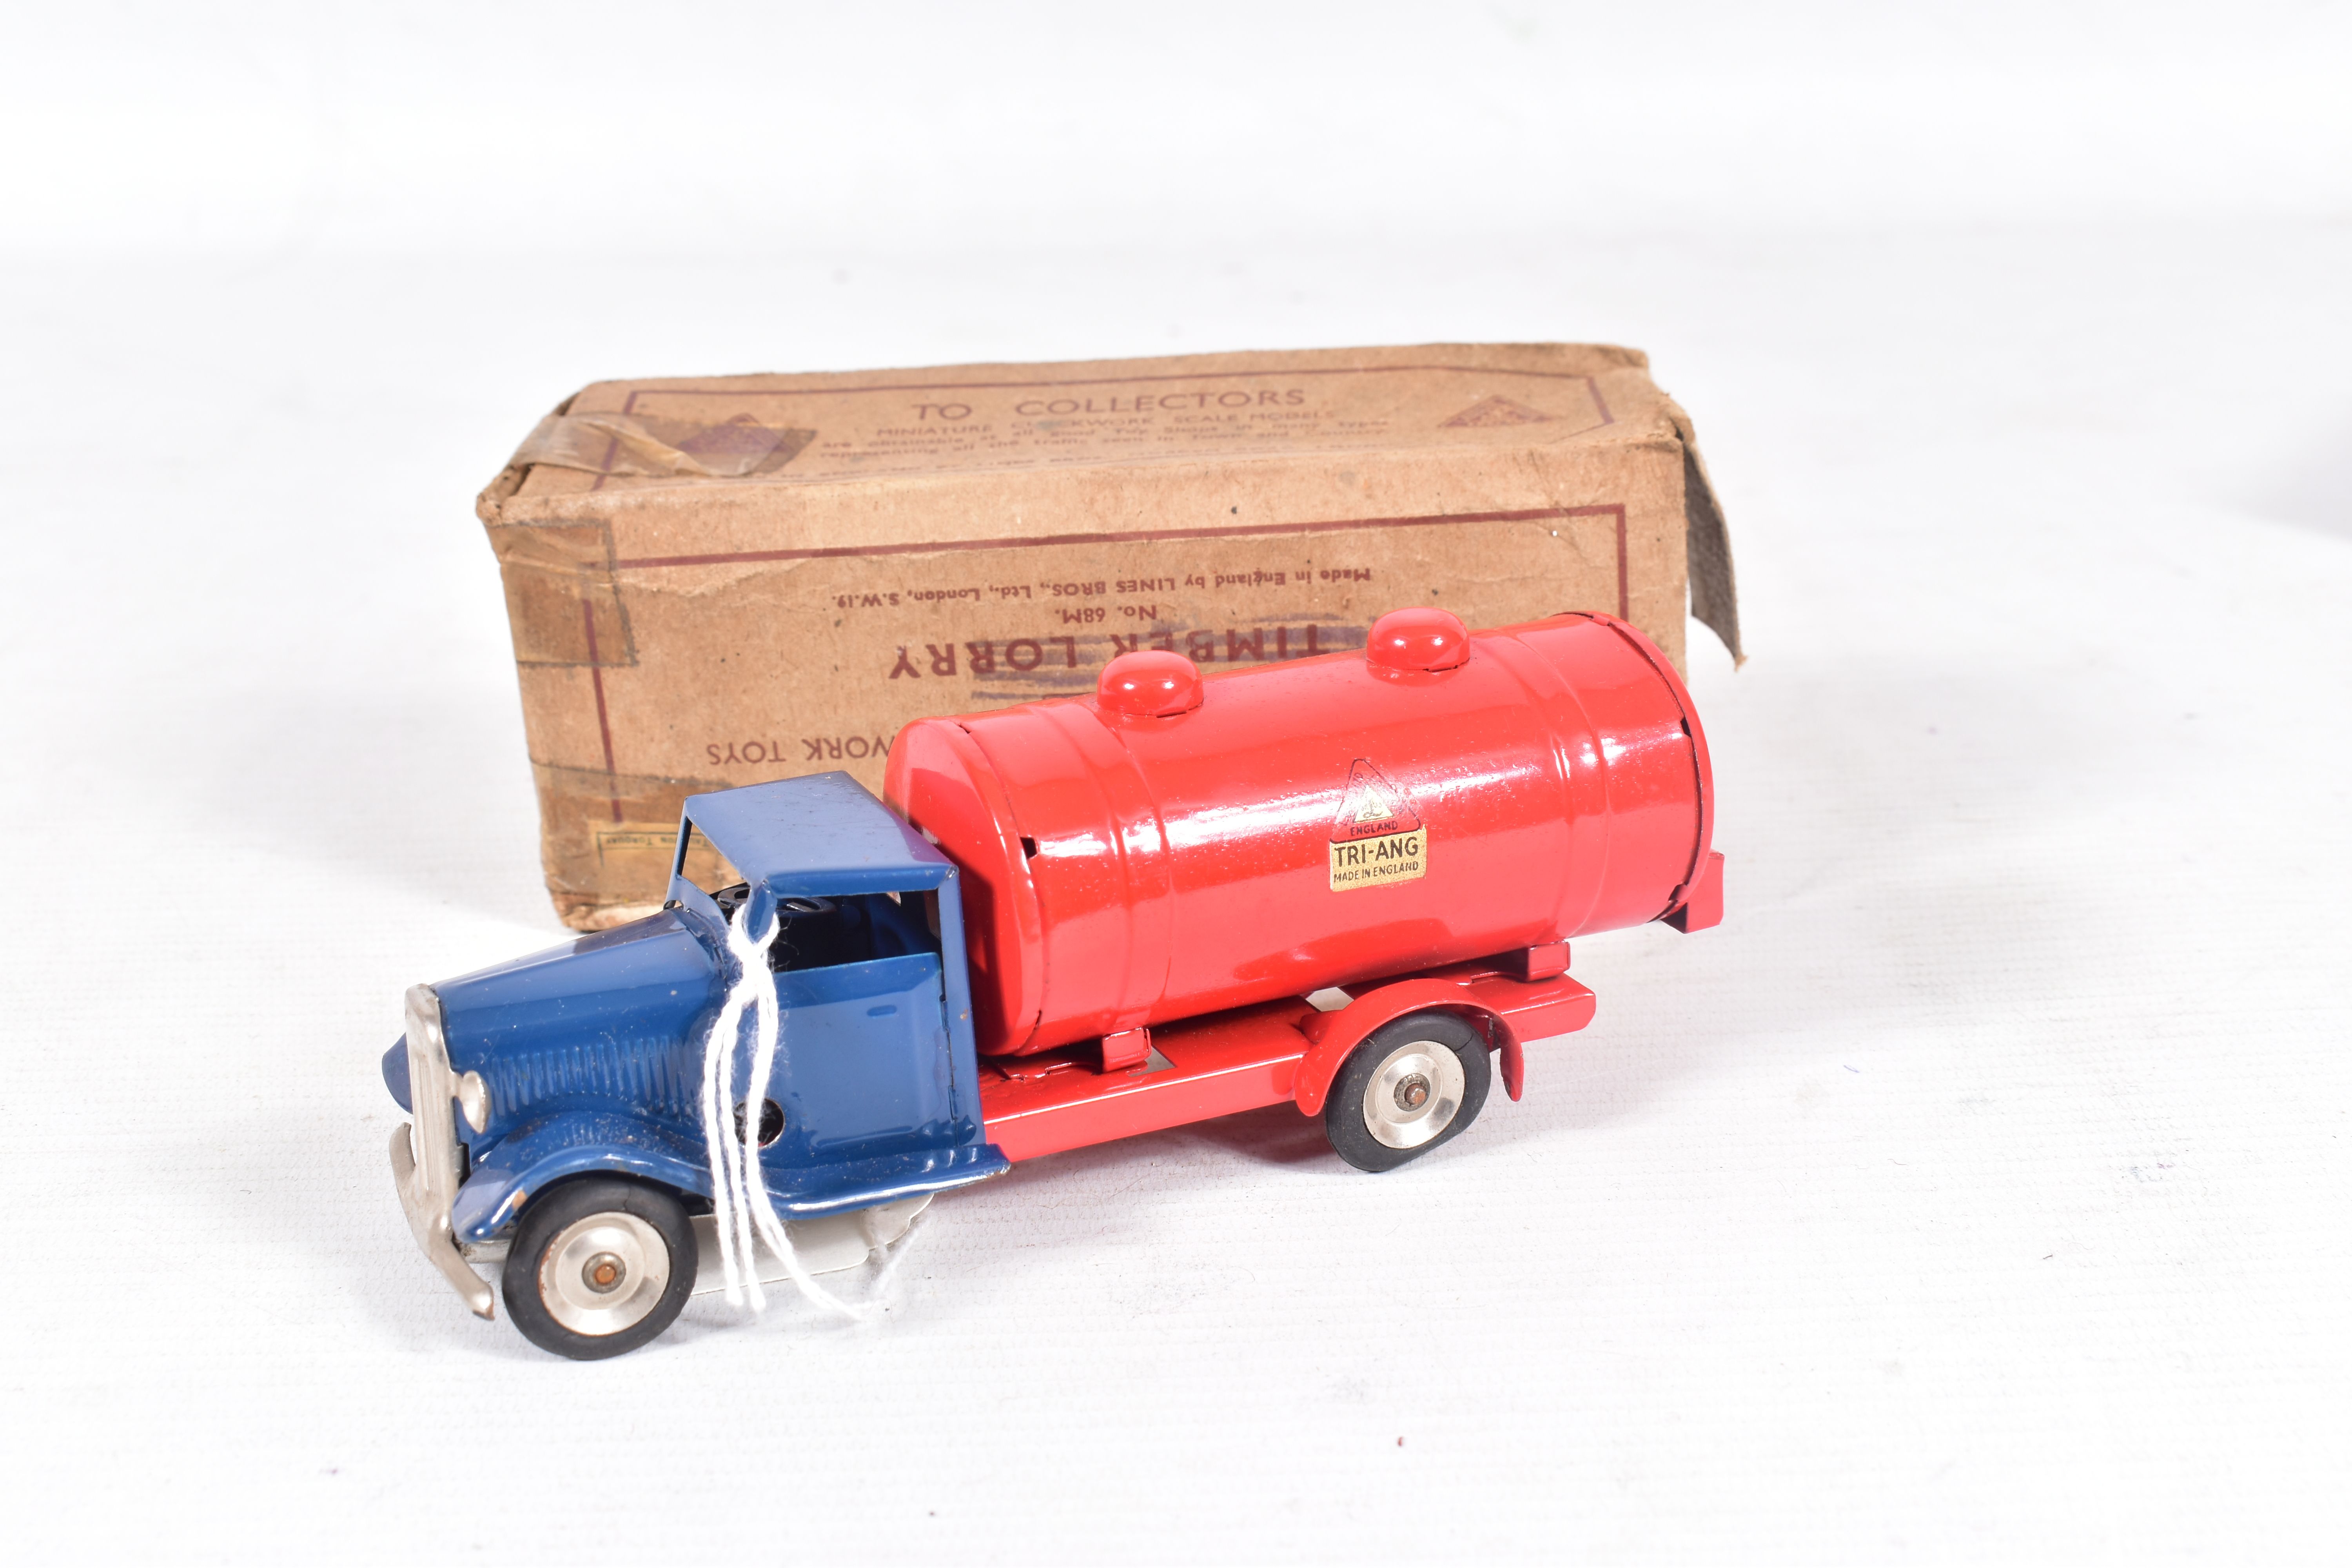 A BOXED TRI-ANG MINIC CLOCKWORK PETROL TANK LORRY, No.15M, complete with damaged Tri-ang Minic